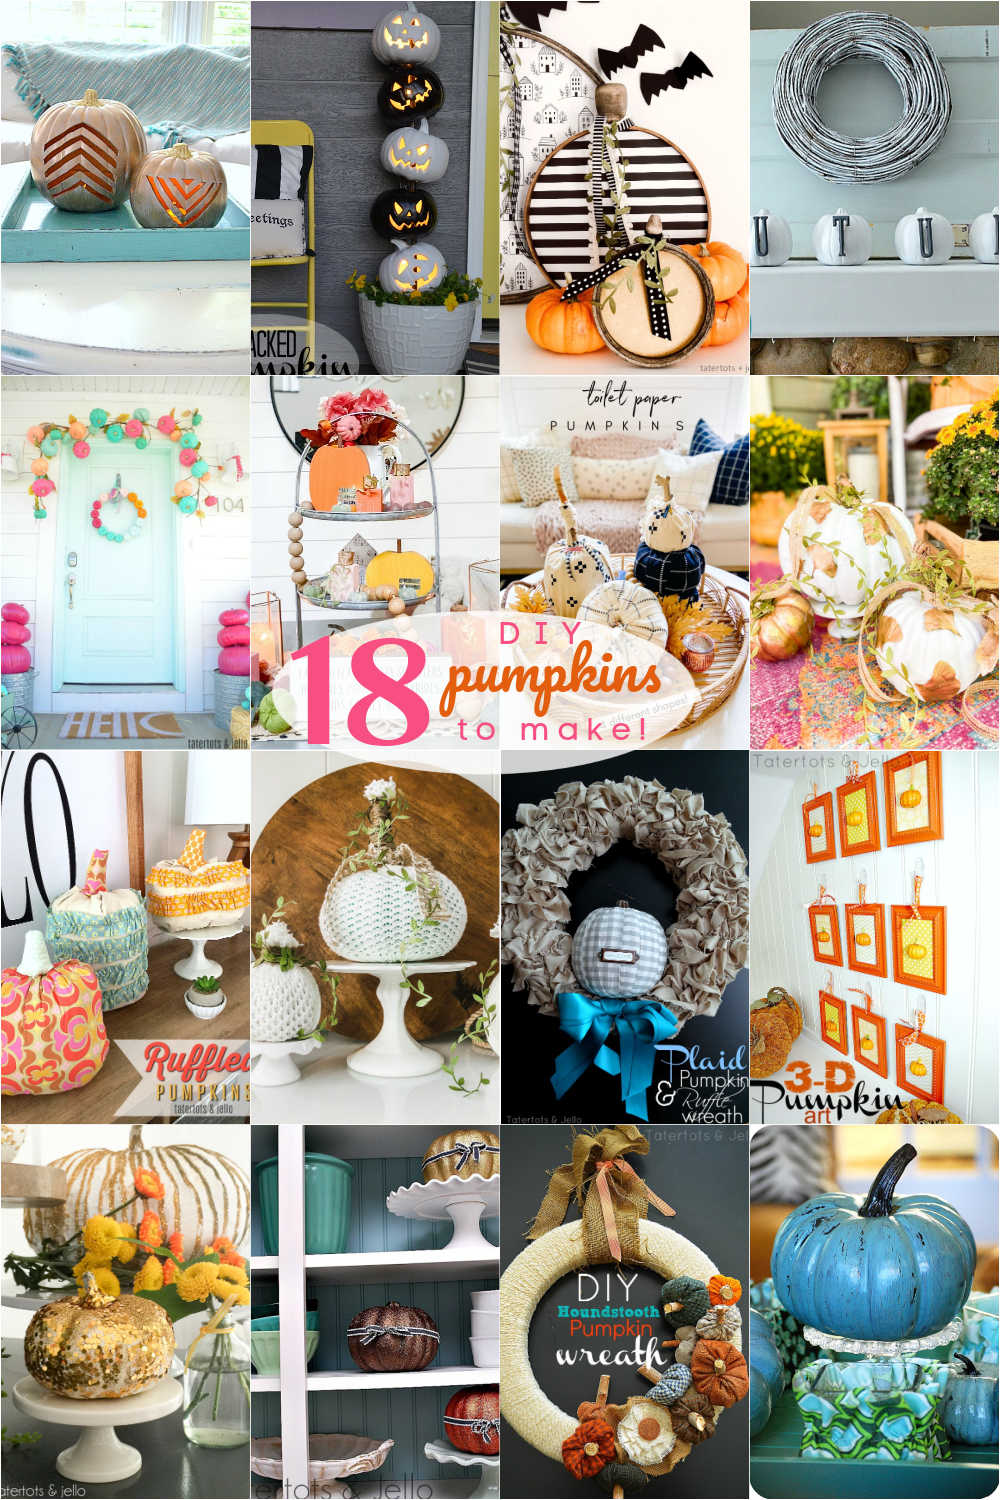 18 DIY Pumpkin Ideas for Fall! Celebrate the beginning of fall by creating some beautiful pumpkins to display! 